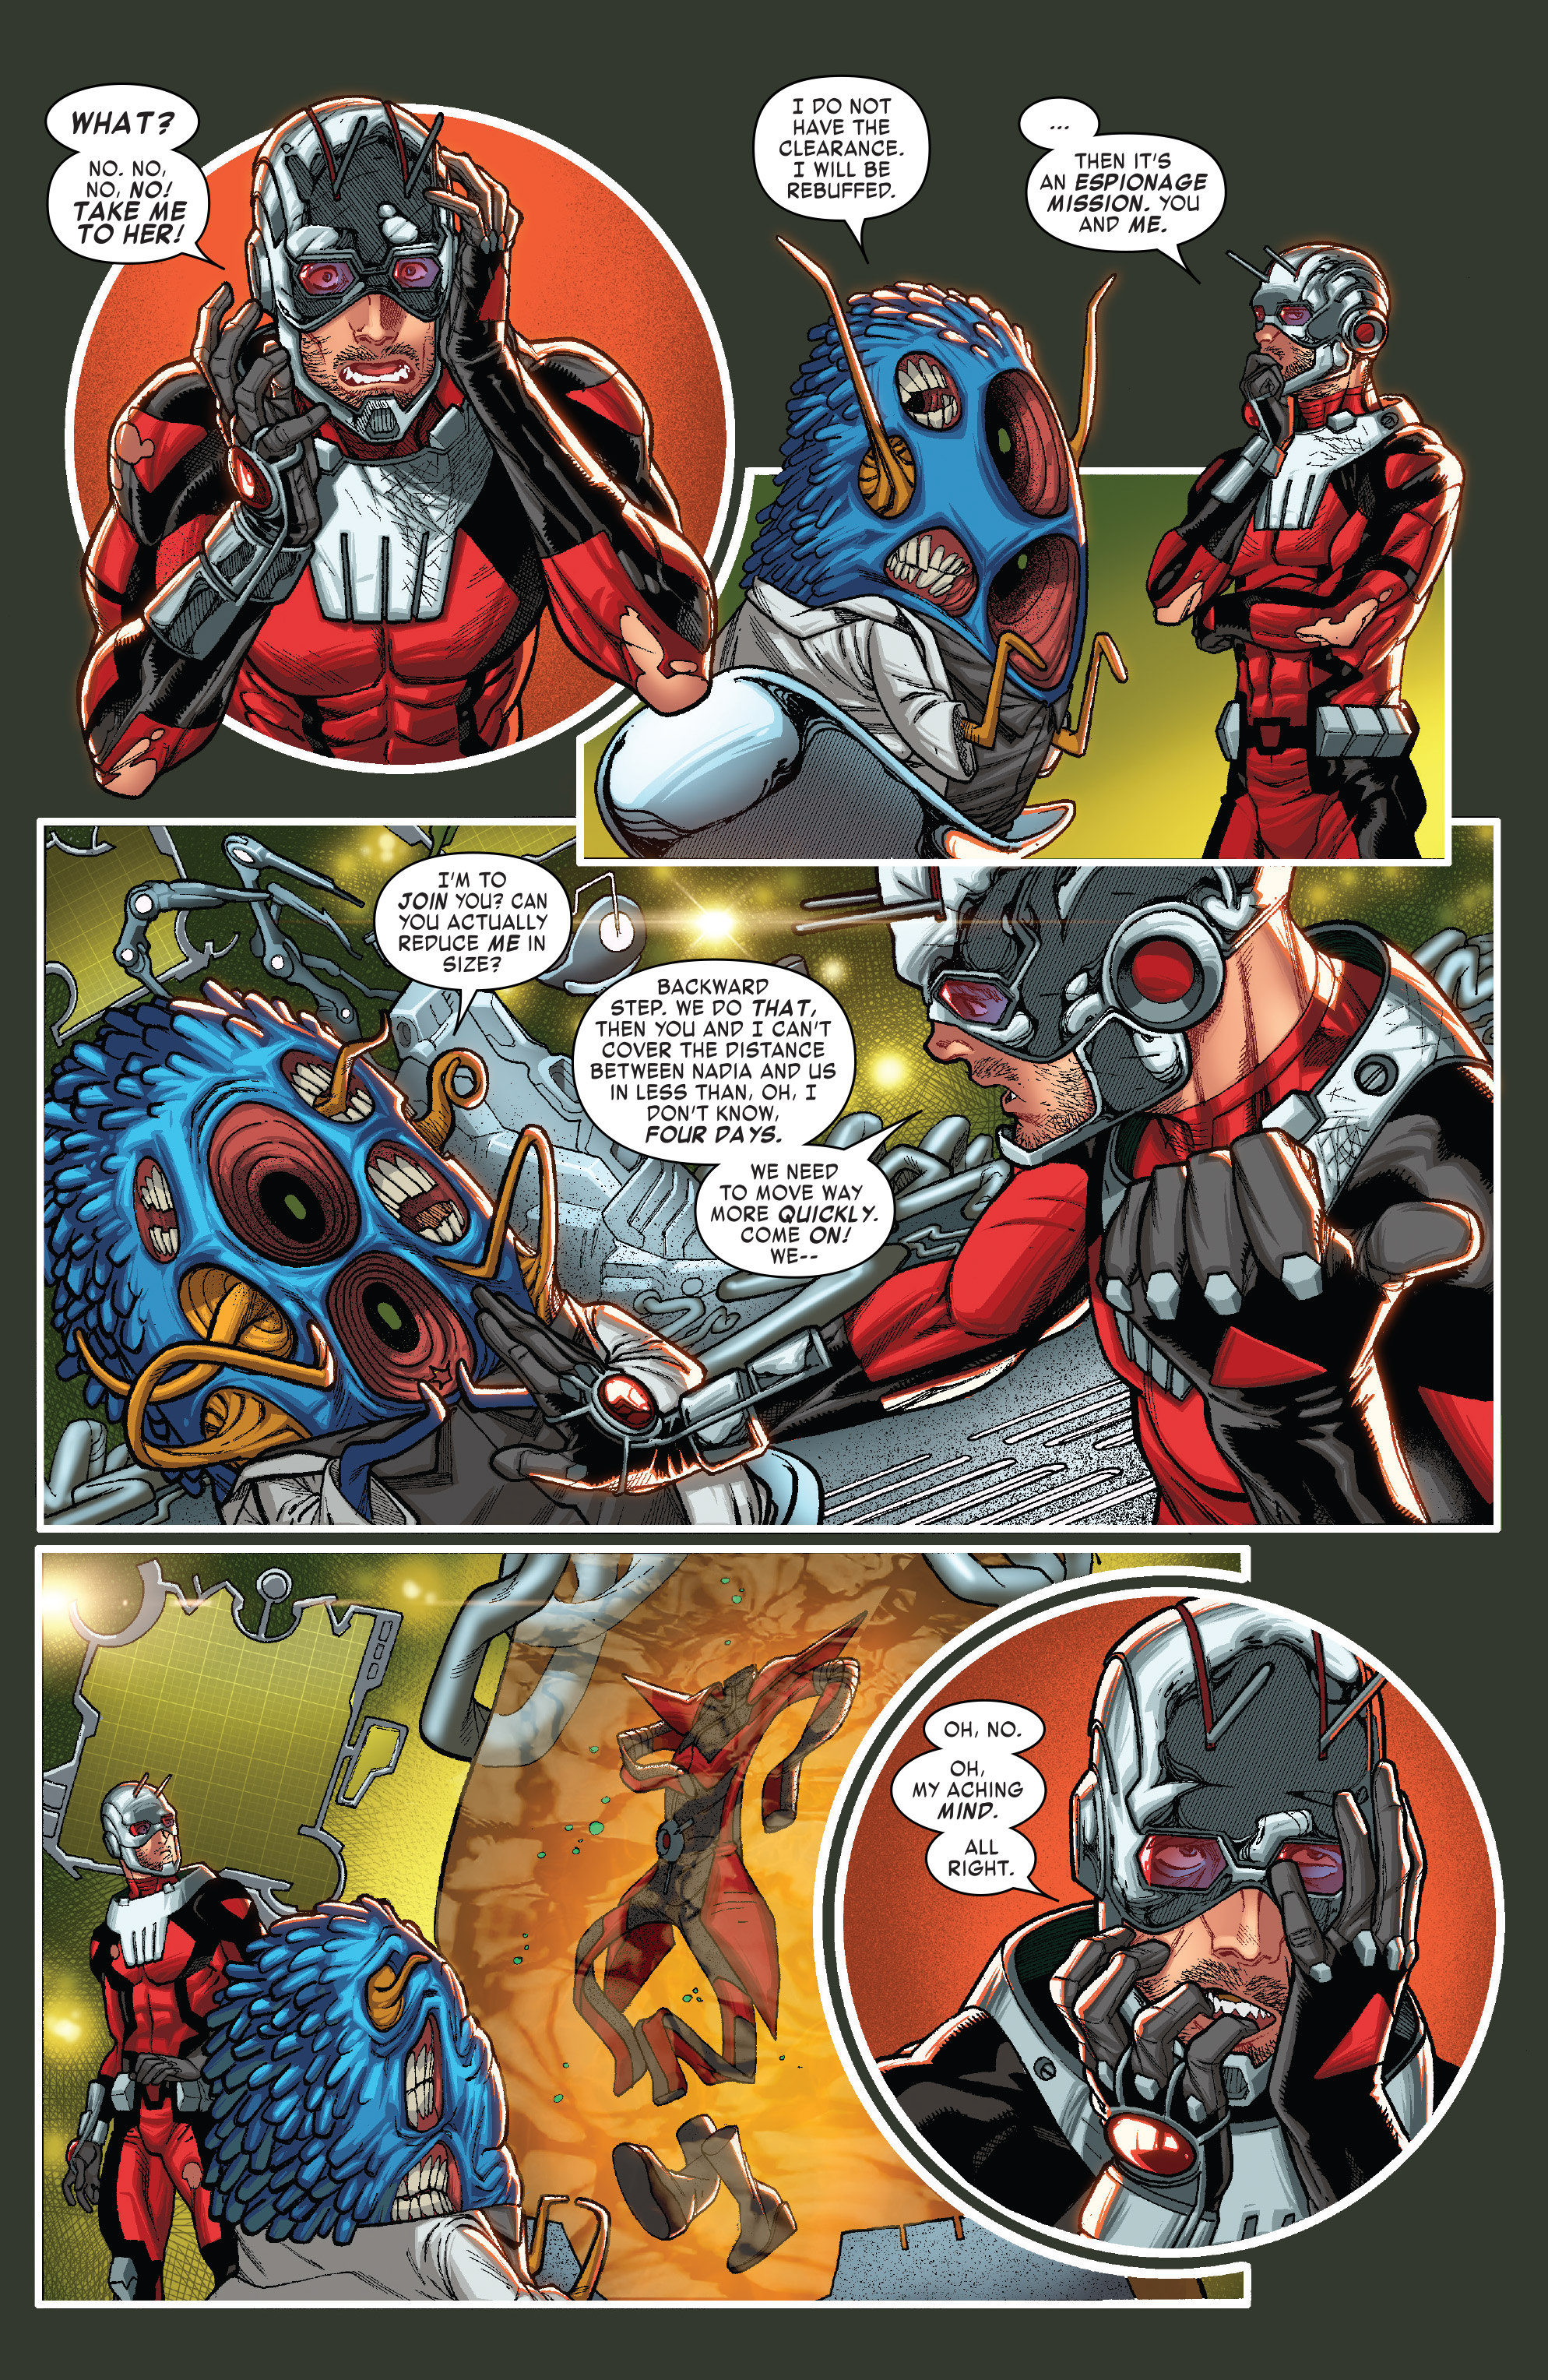 Ant-Man & the Wasp (2018) #5, Comic Issues